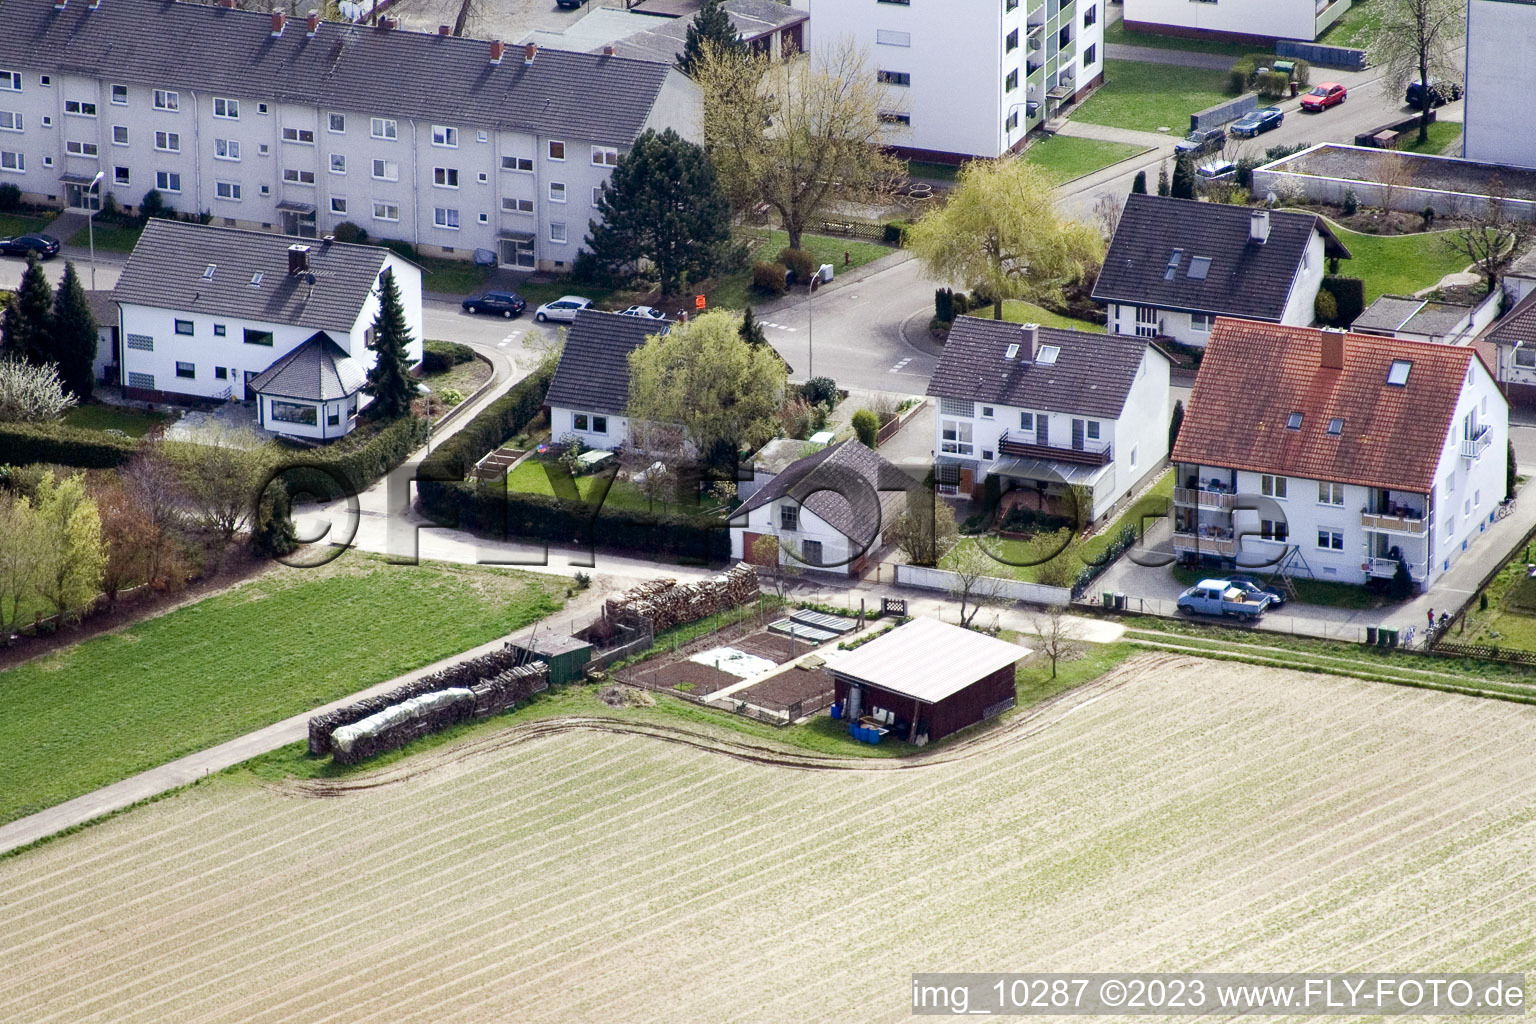 Aerial view of At the water tower in Kandel in the state Rhineland-Palatinate, Germany